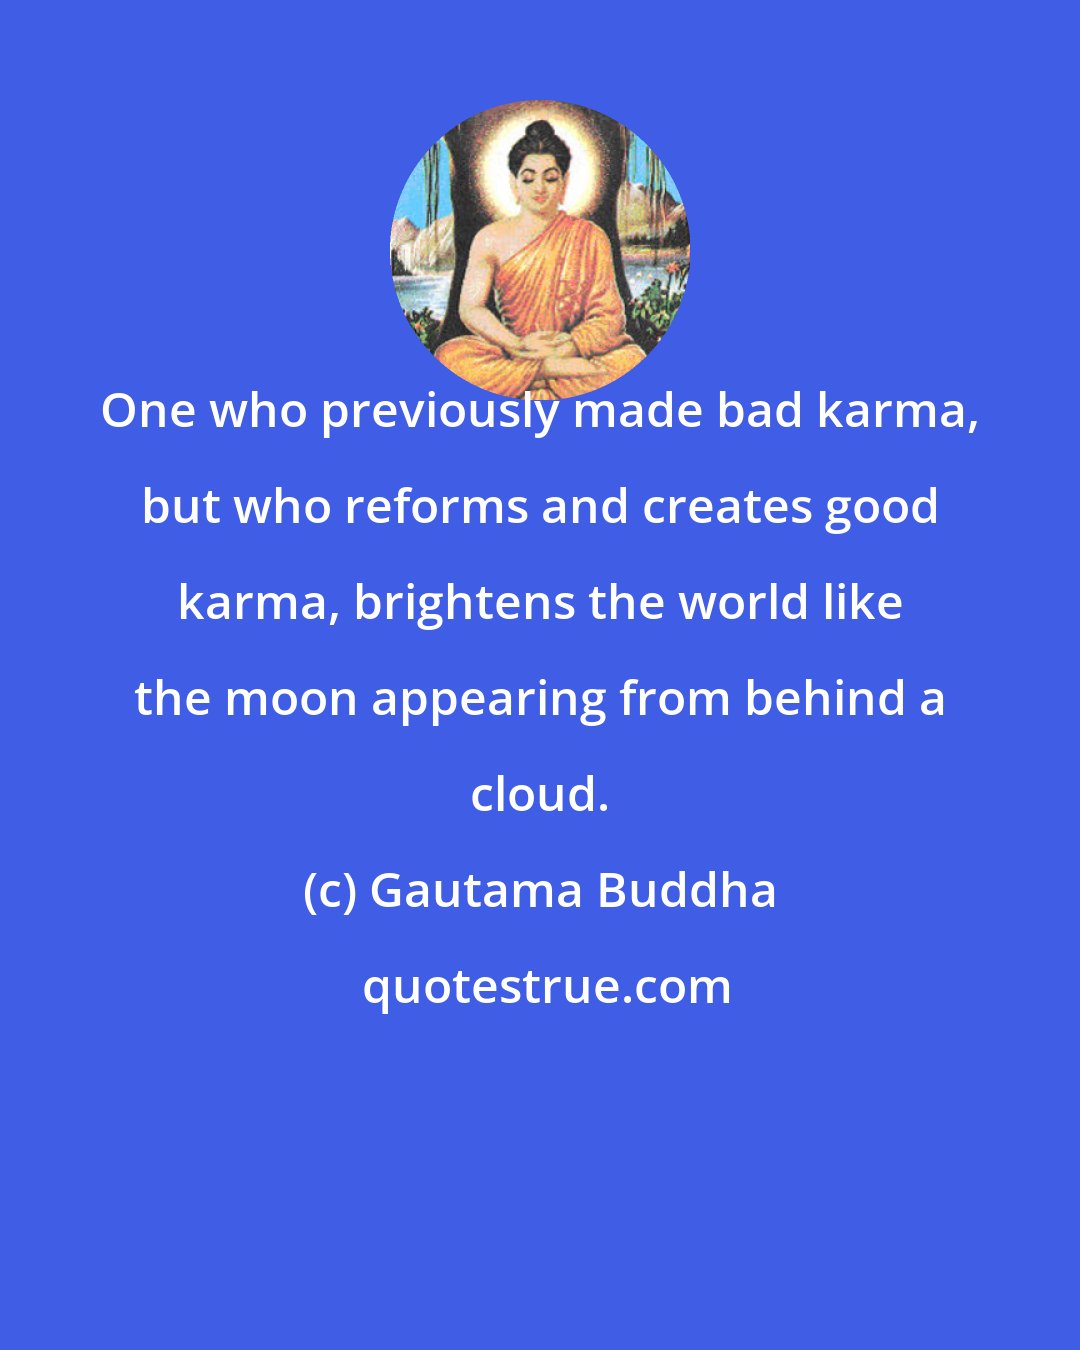 Gautama Buddha: One who previously made bad karma, but who reforms and creates good karma, brightens the world like the moon appearing from behind a cloud.